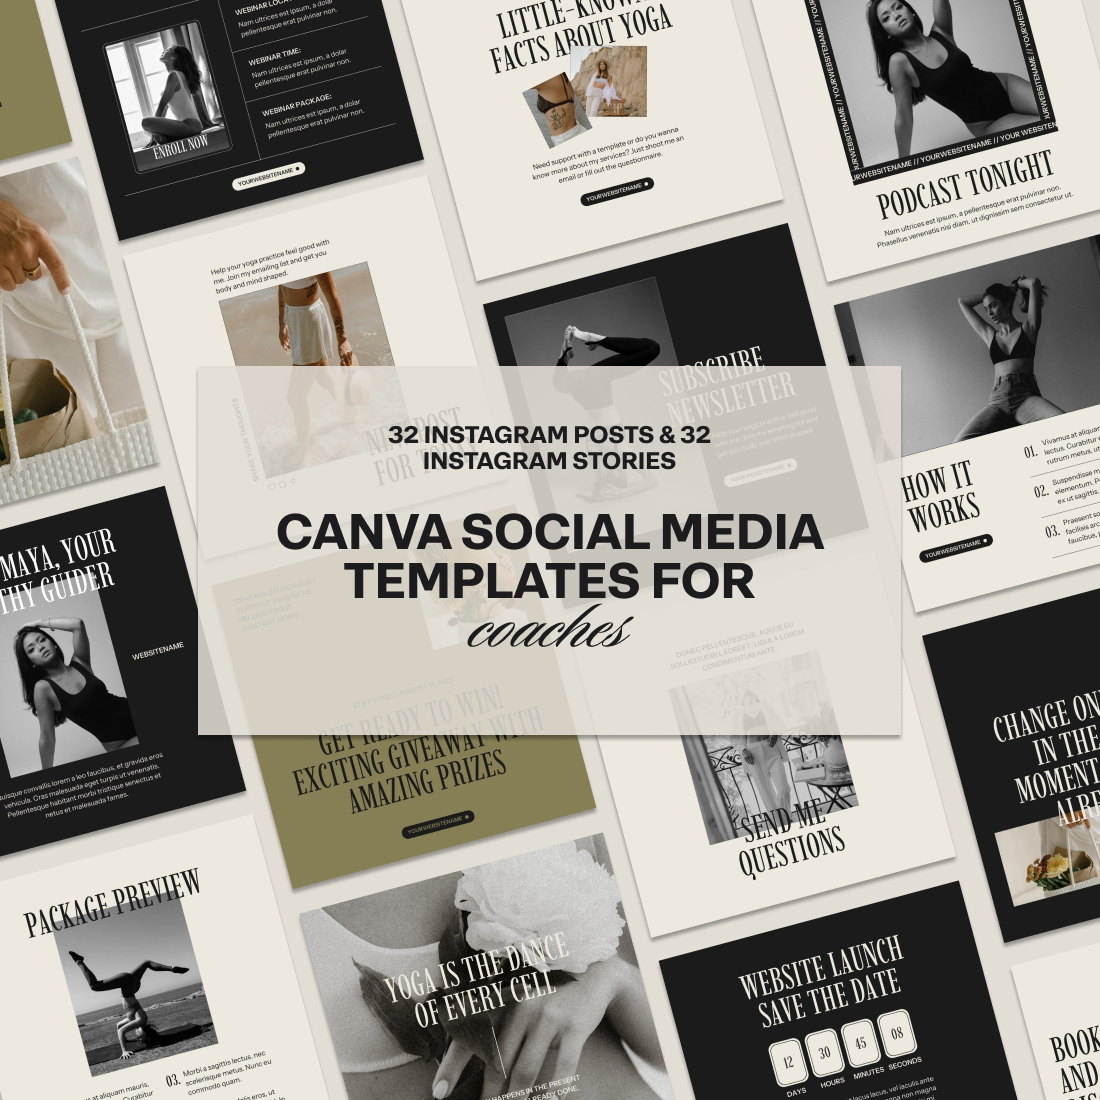 Canva Instagram Templates For Coaches preview image.